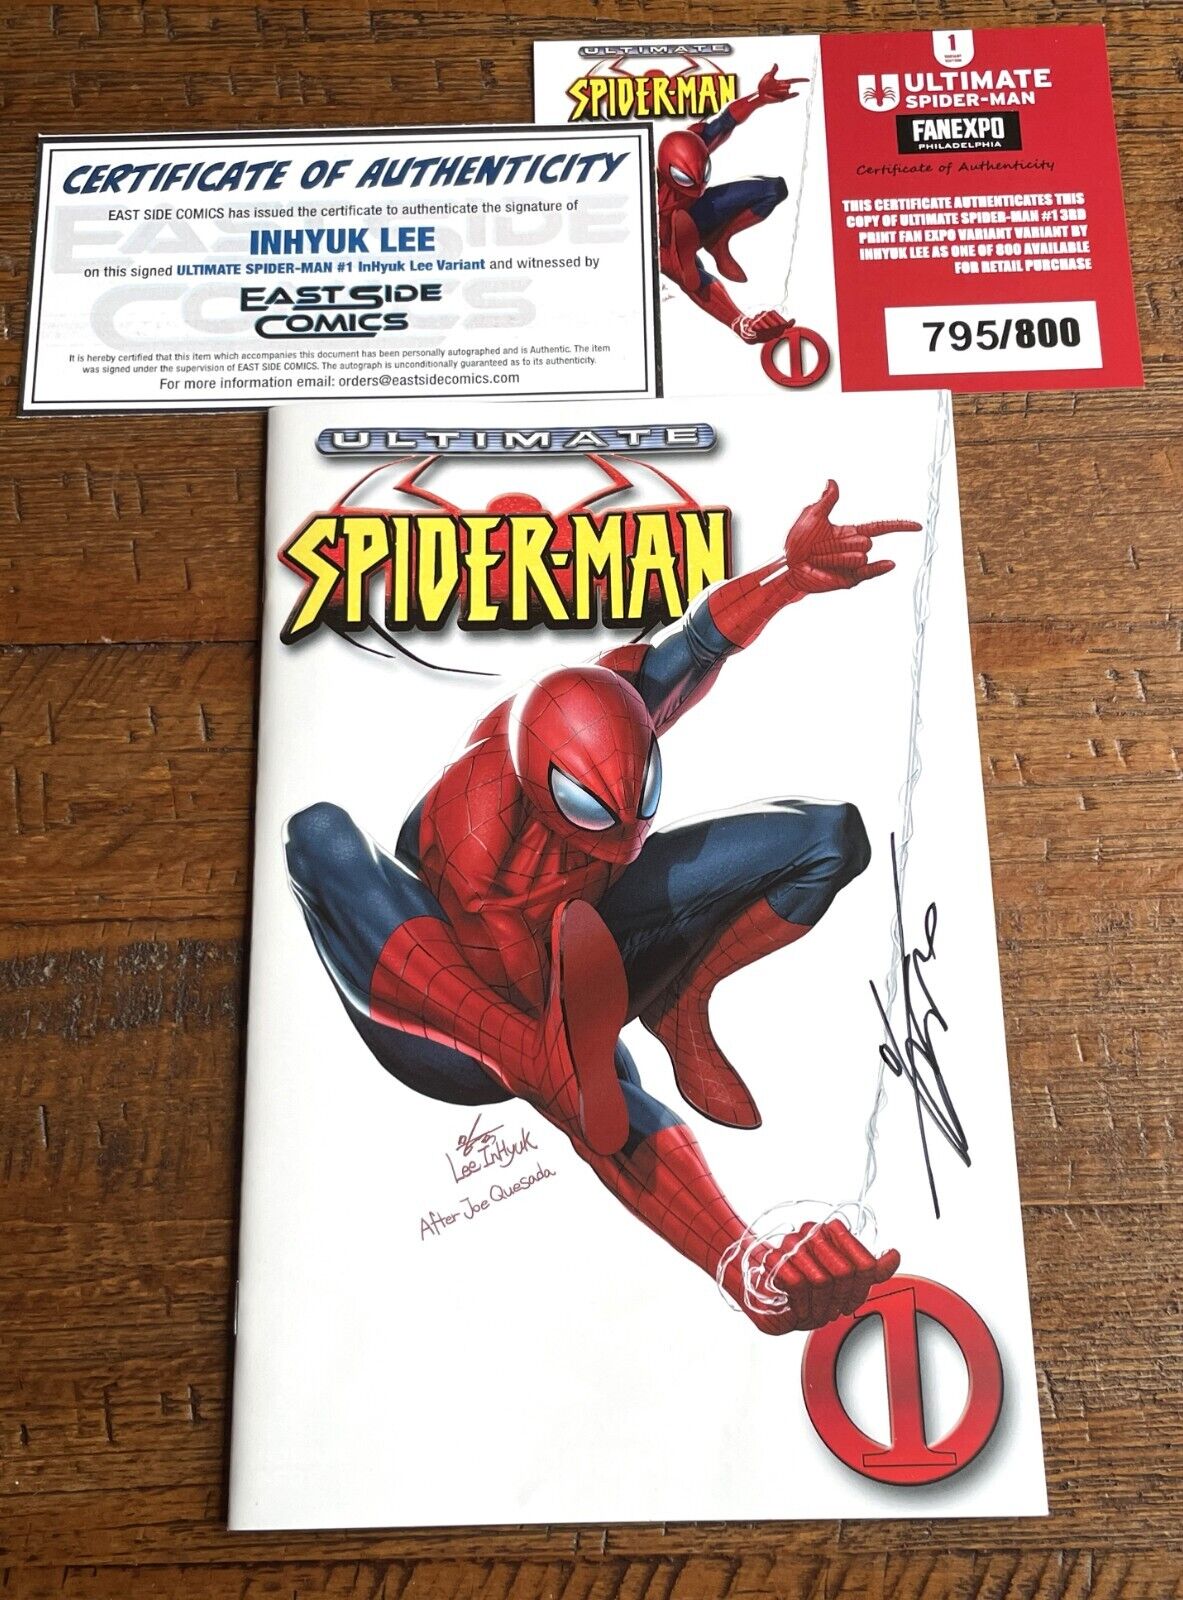 ULTIMATE SPIDER-MAN #1 INHYUK LEE SIGNED FAN EXPO PHILLY WHITE VARIANT HOMAGE